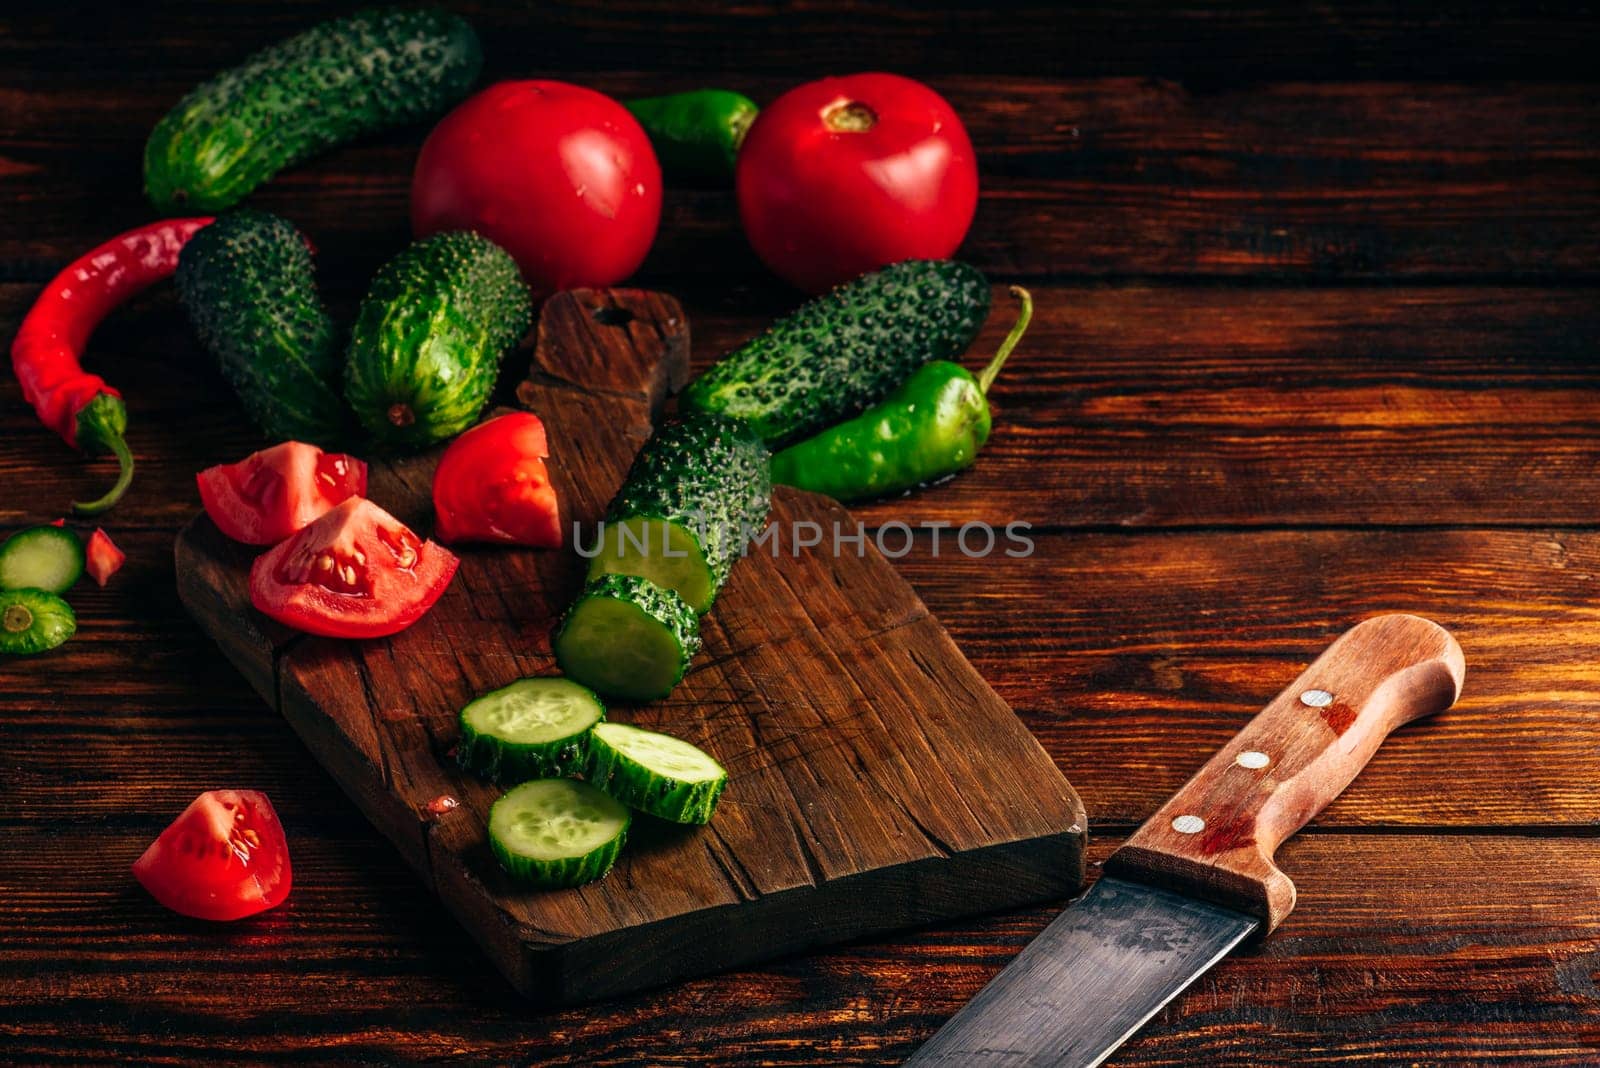 Sliced vegetables. Tomatoes, cucumbers and chili peppers over wooden background.